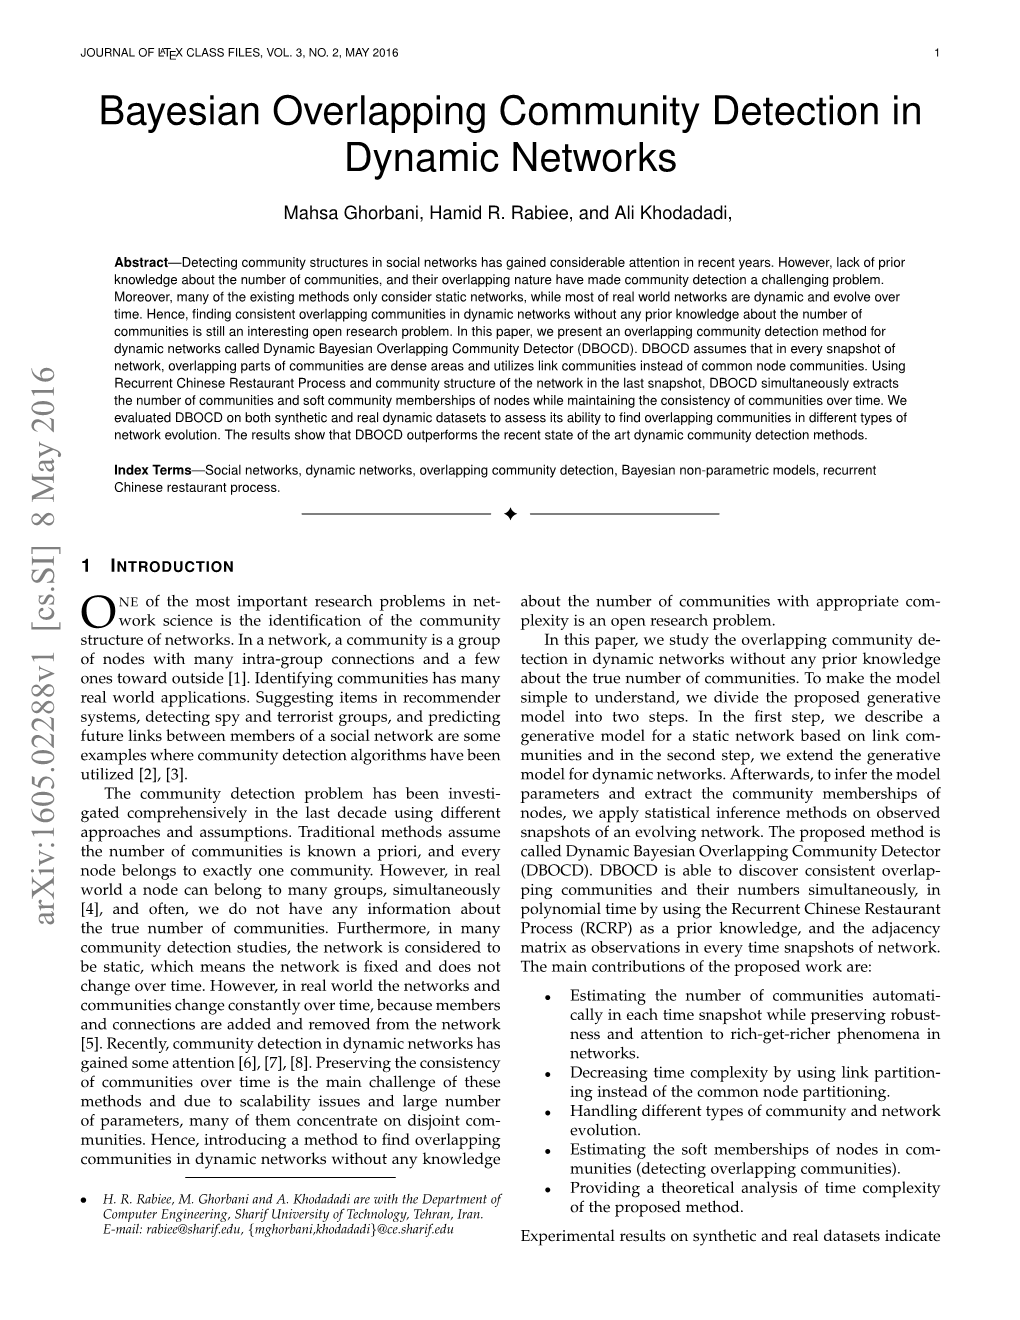 Bayesian Overlapping Community Detection in Dynamic Networks